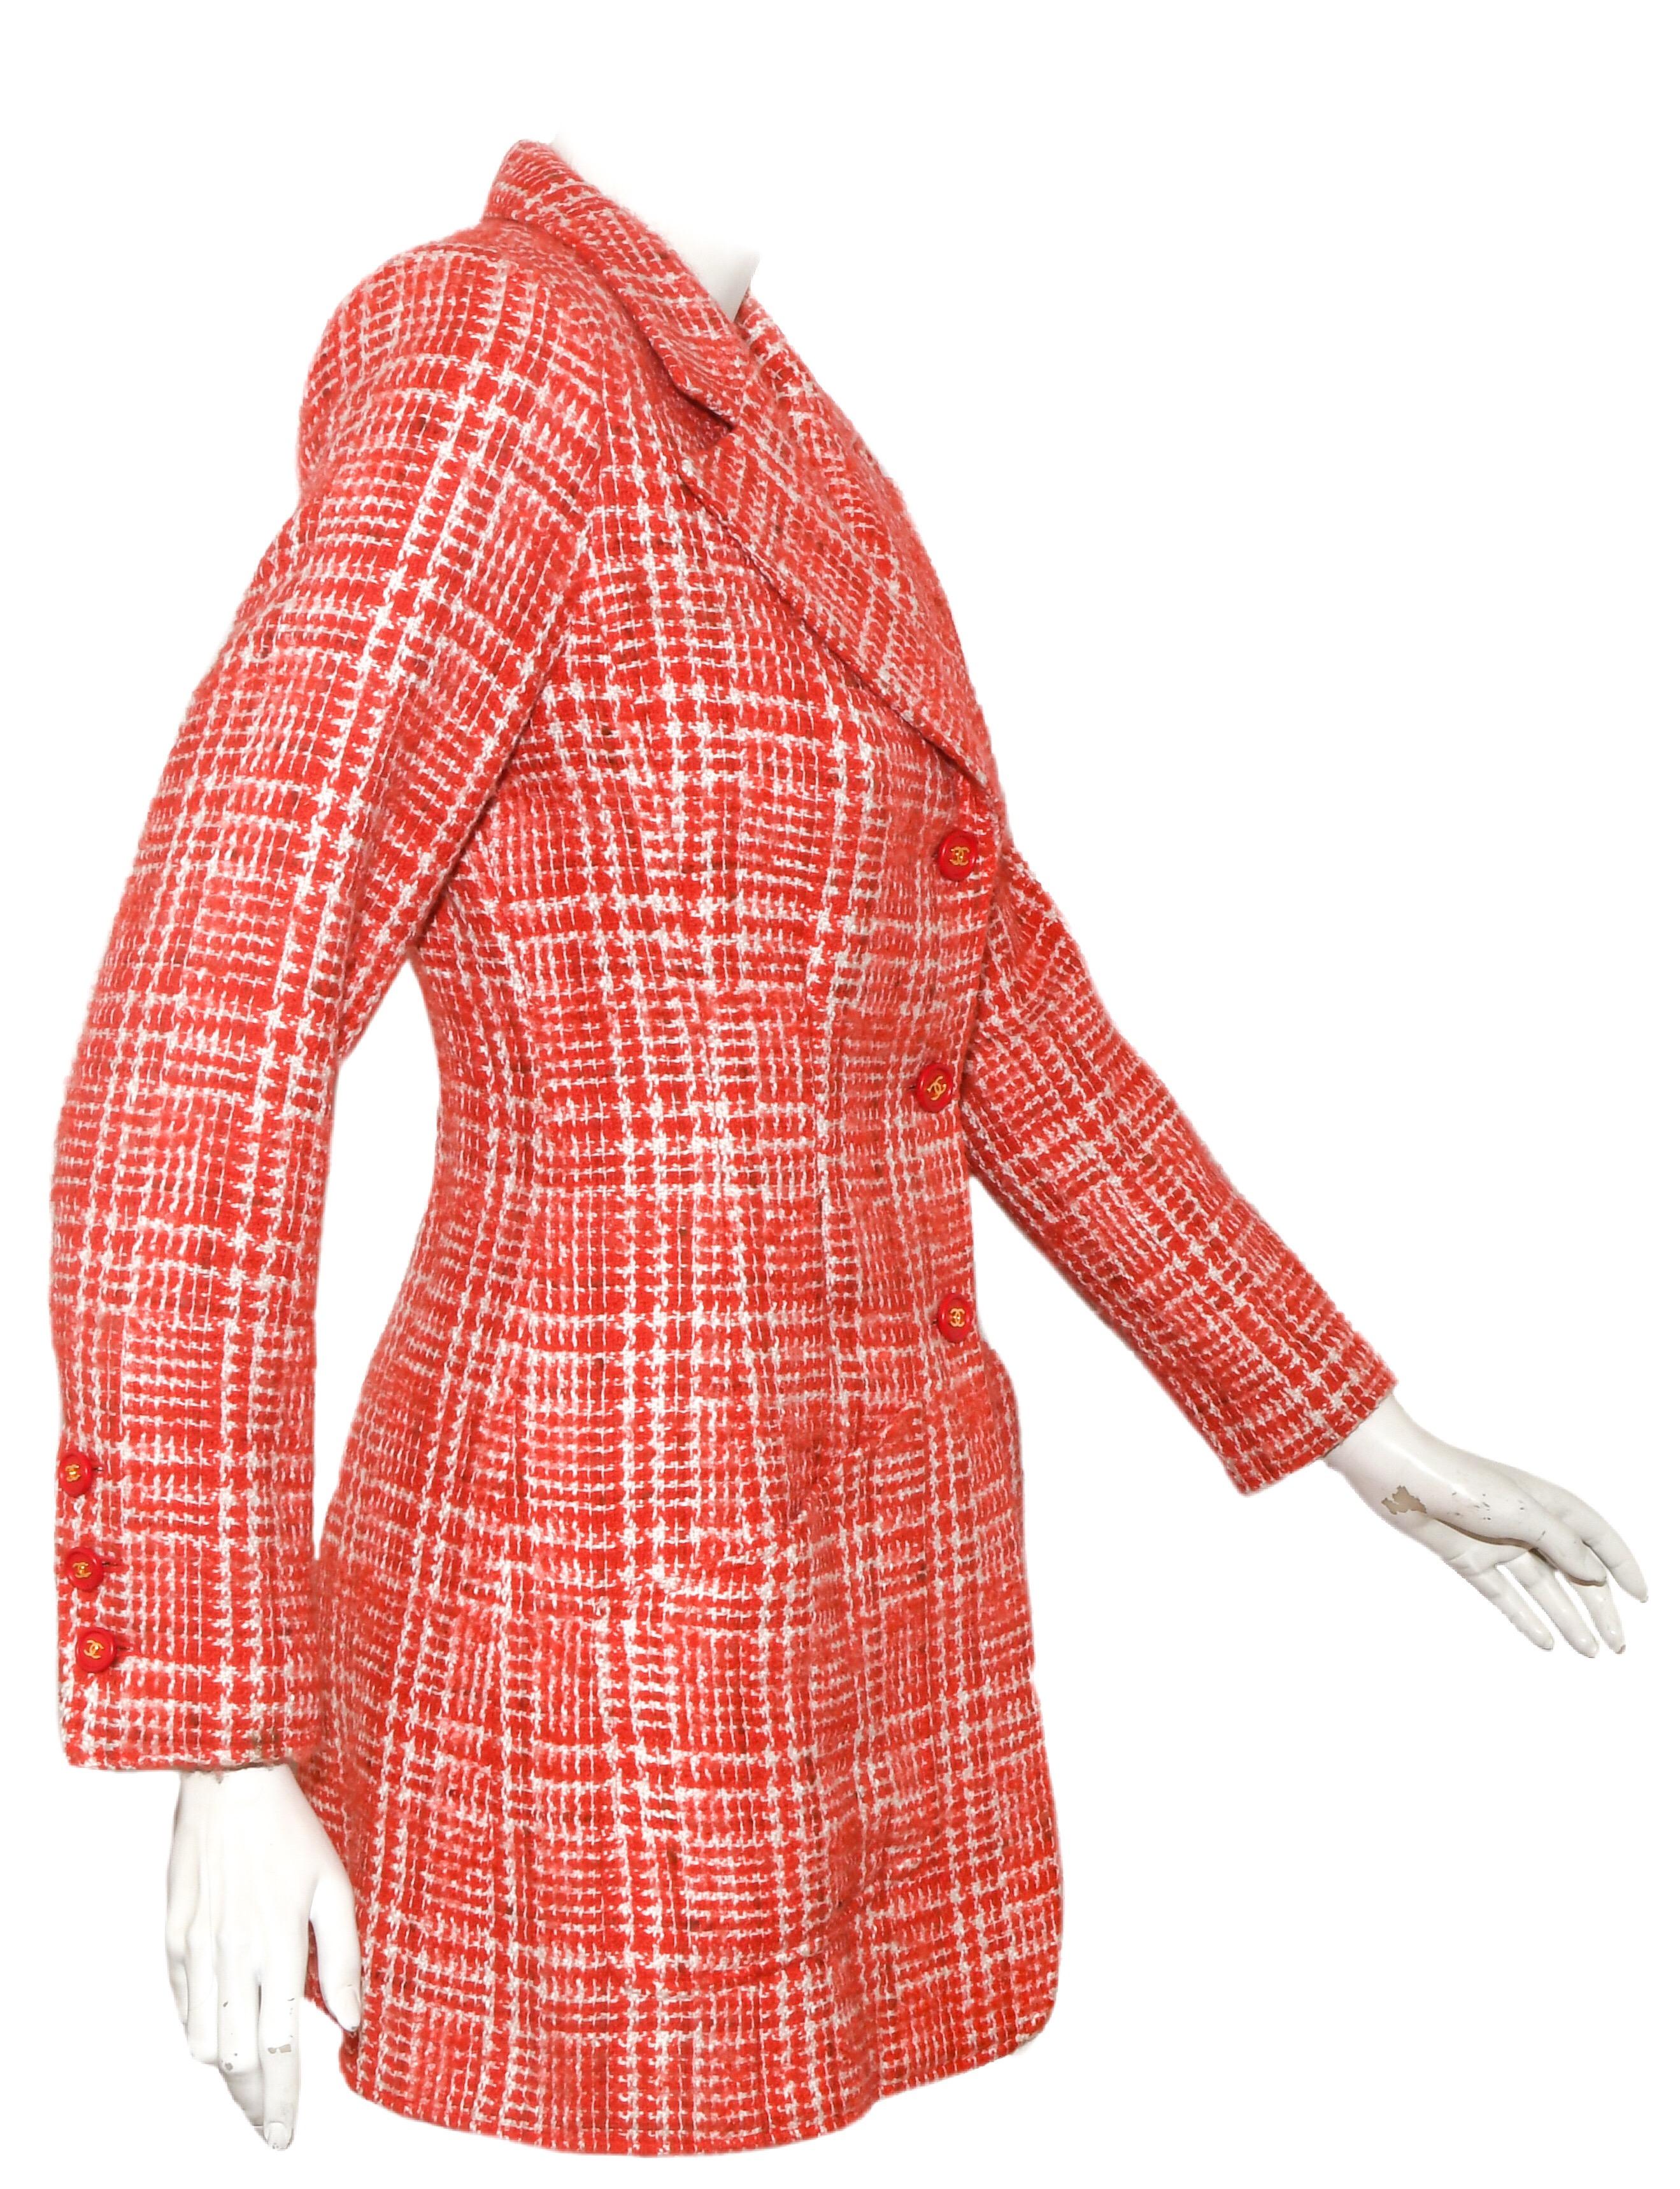 Chanel wool blend long jacket from the Spring '97 has three orange and gold tone buttons along the front center, for closure, also, on the cuffs. Two small slip pockets at the hem.  Lined in orange CC silk fabric. This jacket is in excellent